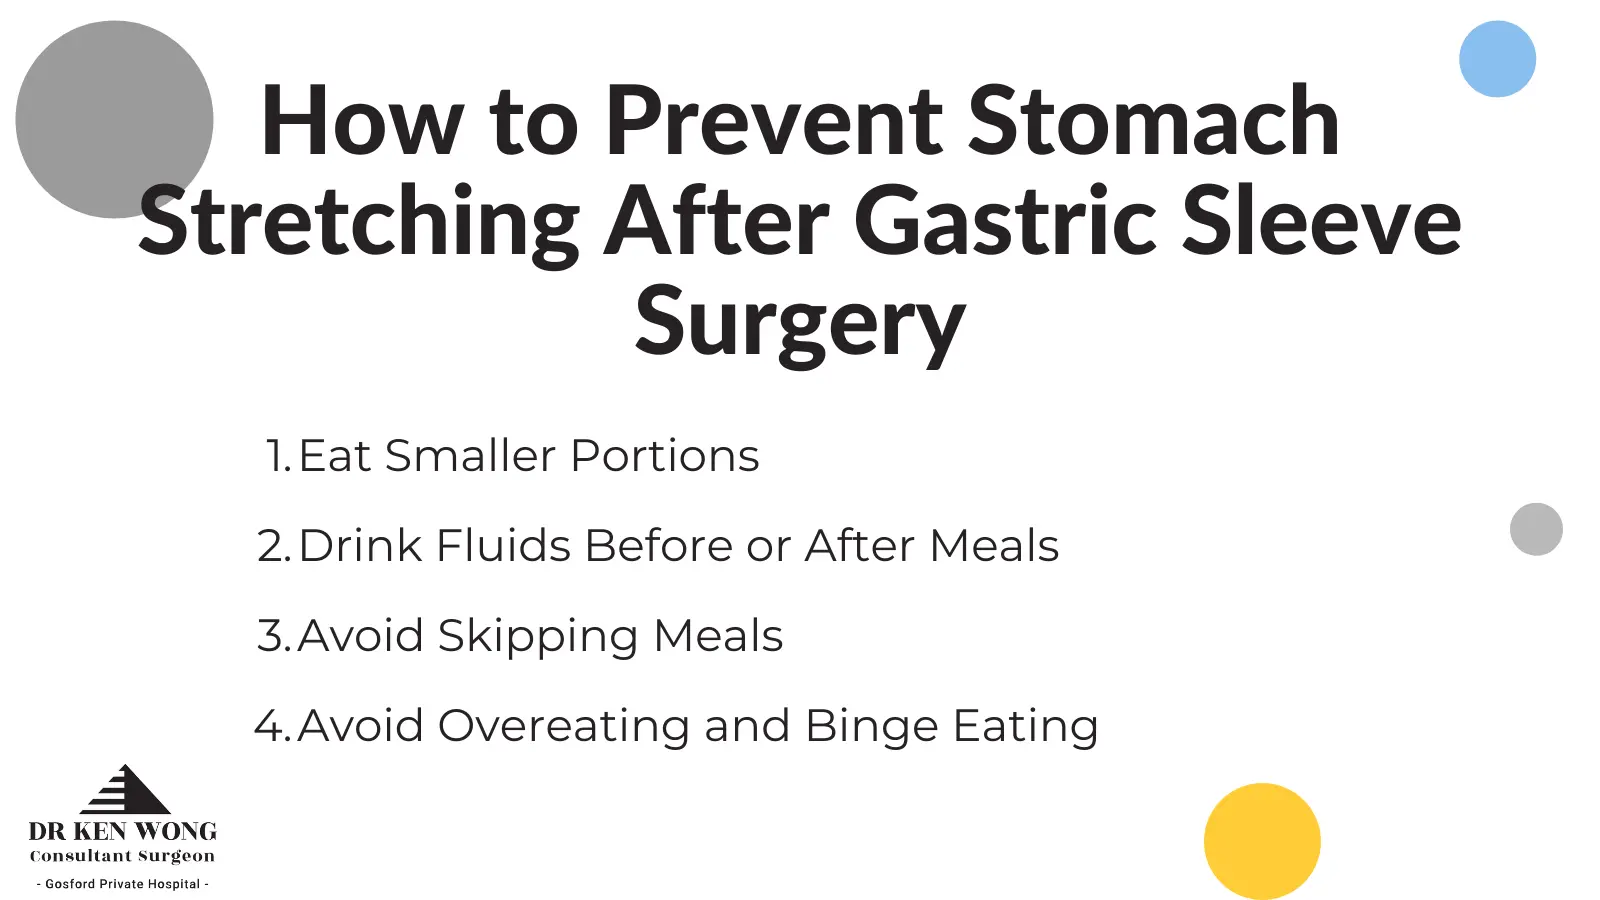 How to prevent stomach stretching